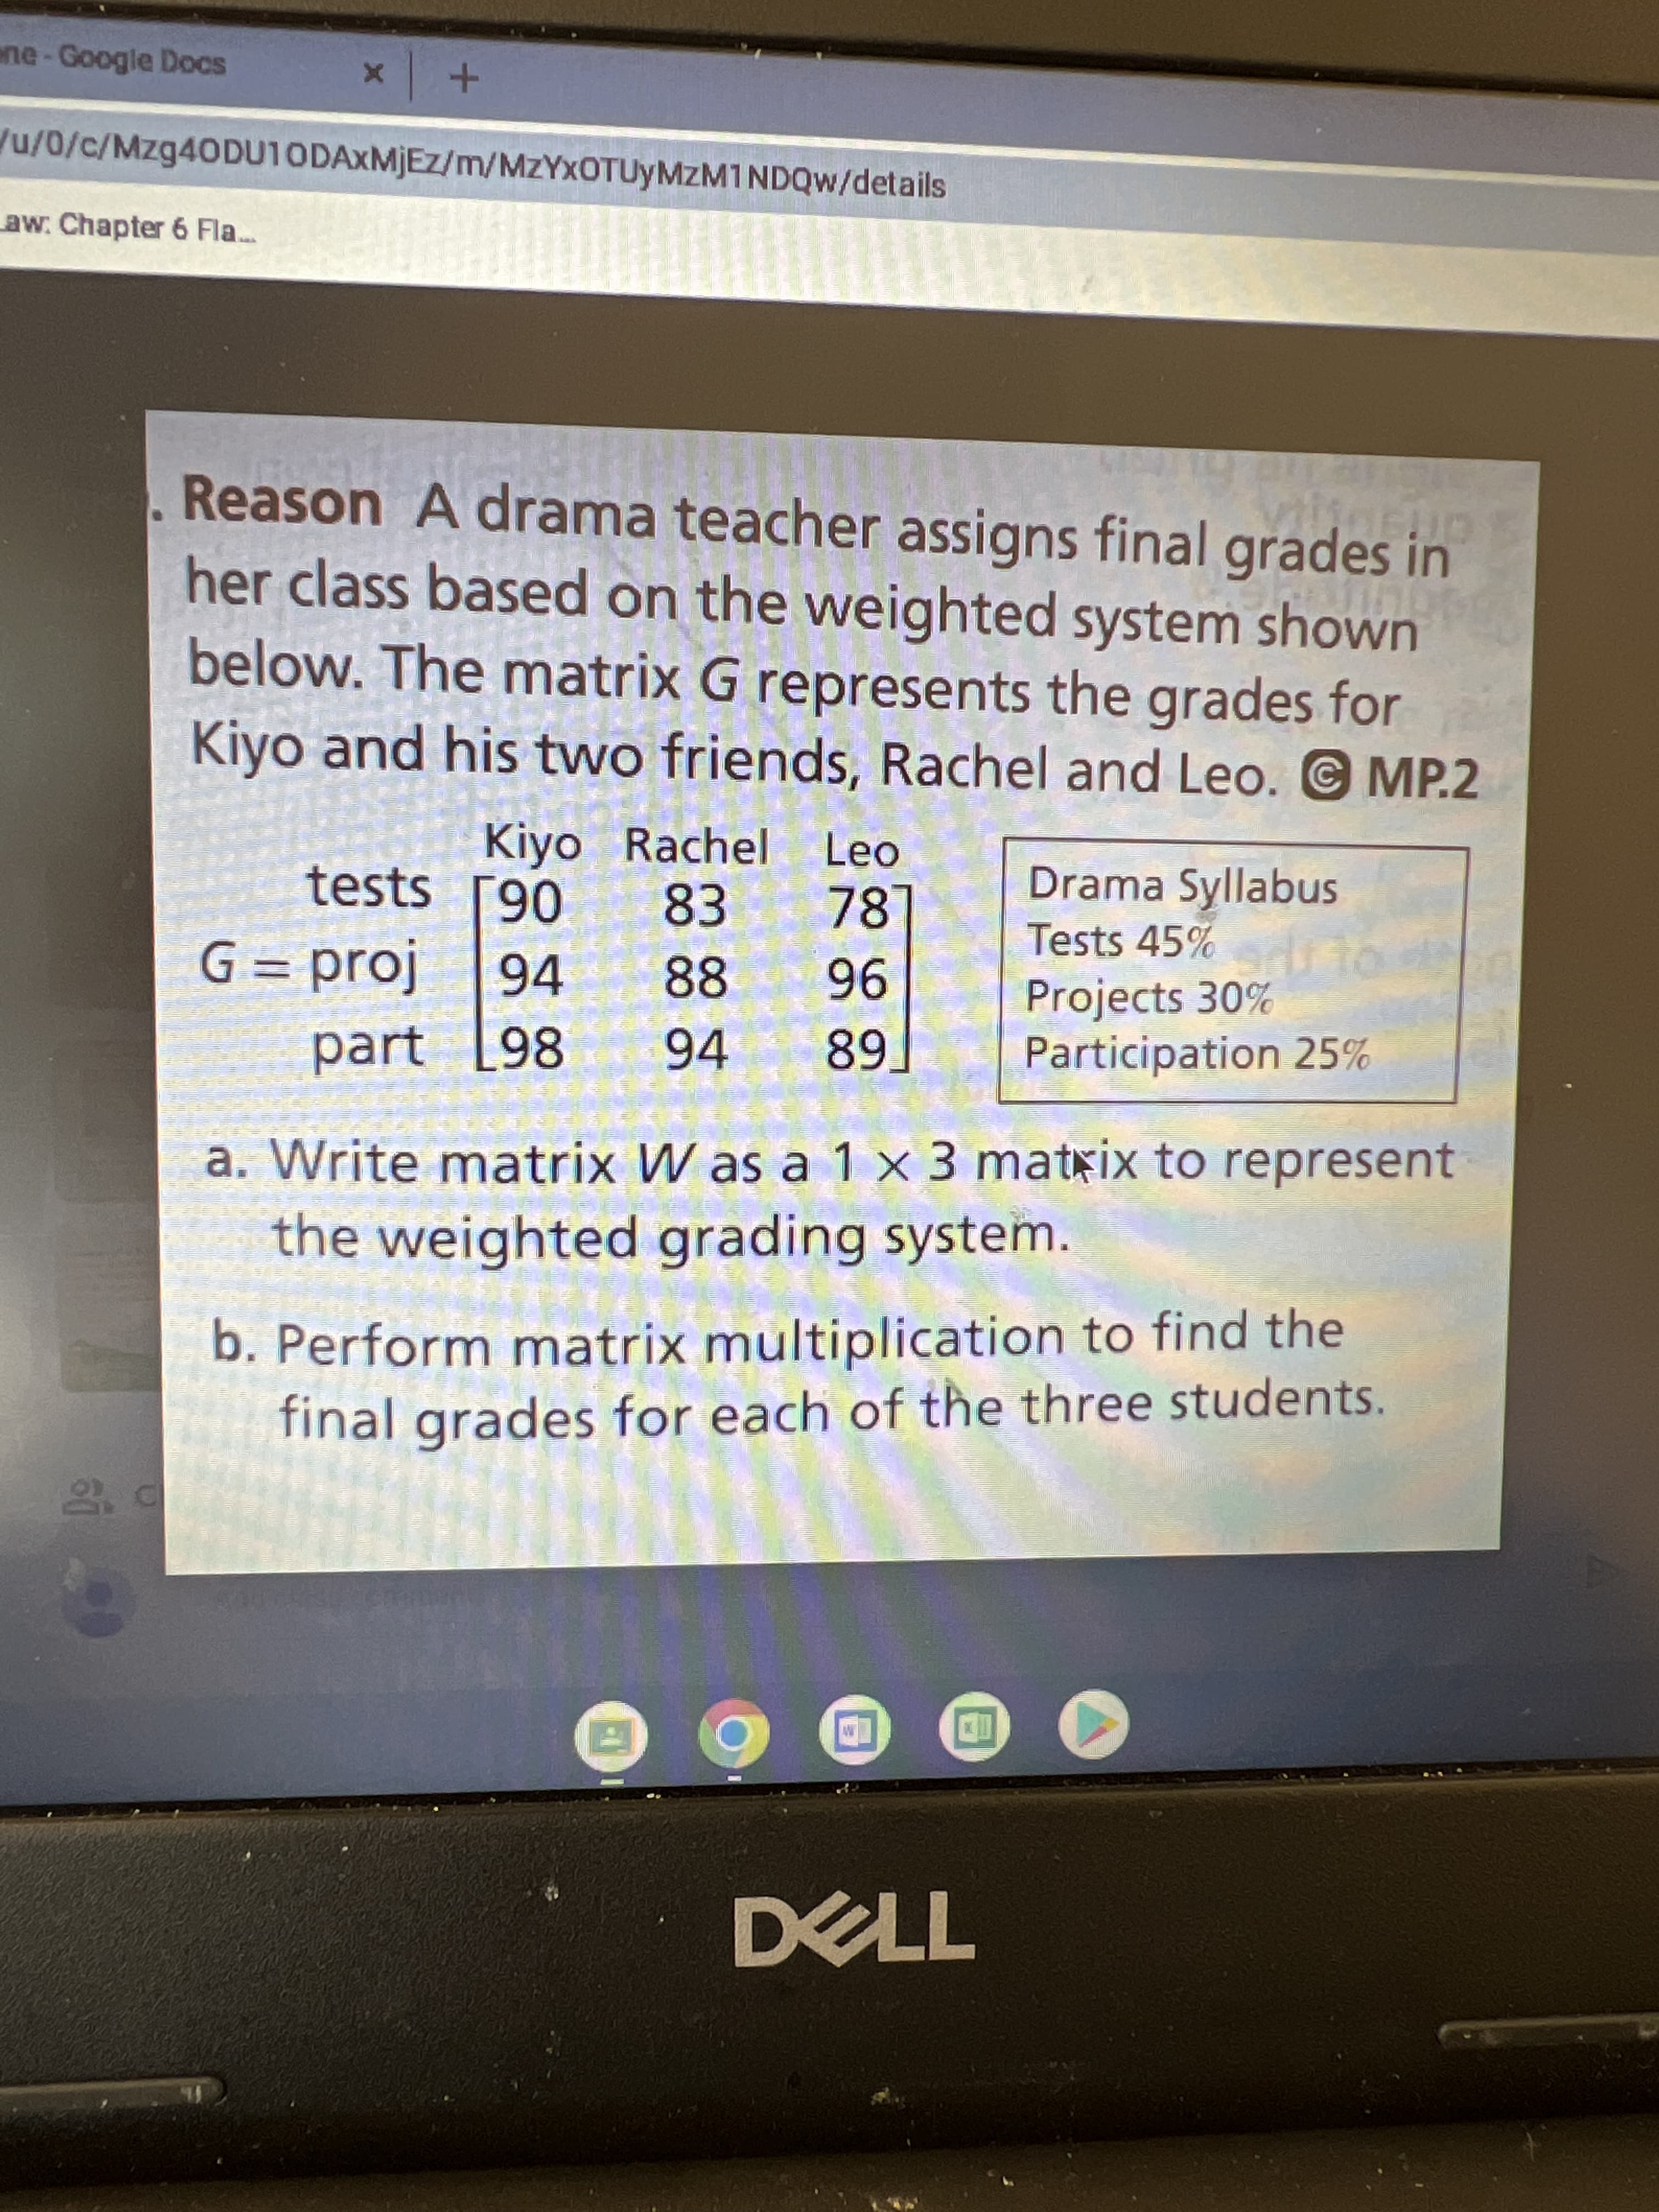 ne-Google Docs
u/0/c/Mzg40DU10DAxMjEz/m/MZYXOTUYMZM1NDQW/details
aw: Chapter 6 Fla..
Reason A drama teacher assigns final grades in
her class based on the weighted system shown
below. The matrix G represents the grades for
Kiyo and his two friends, Rachel and Leo. © MP.2
Kiyo Rachel Leo
83
Drama Syllabus
Tests 45%
tests [90
78
G = proj
96
94 89.
94
88
Projects 30%
Participation 25%
part [98
a. Write matrix W as a 1 x 3 matxix to represent
the weighted grading system.
b. Perform matrix multiplication to find the
final grades for each of the three students.
